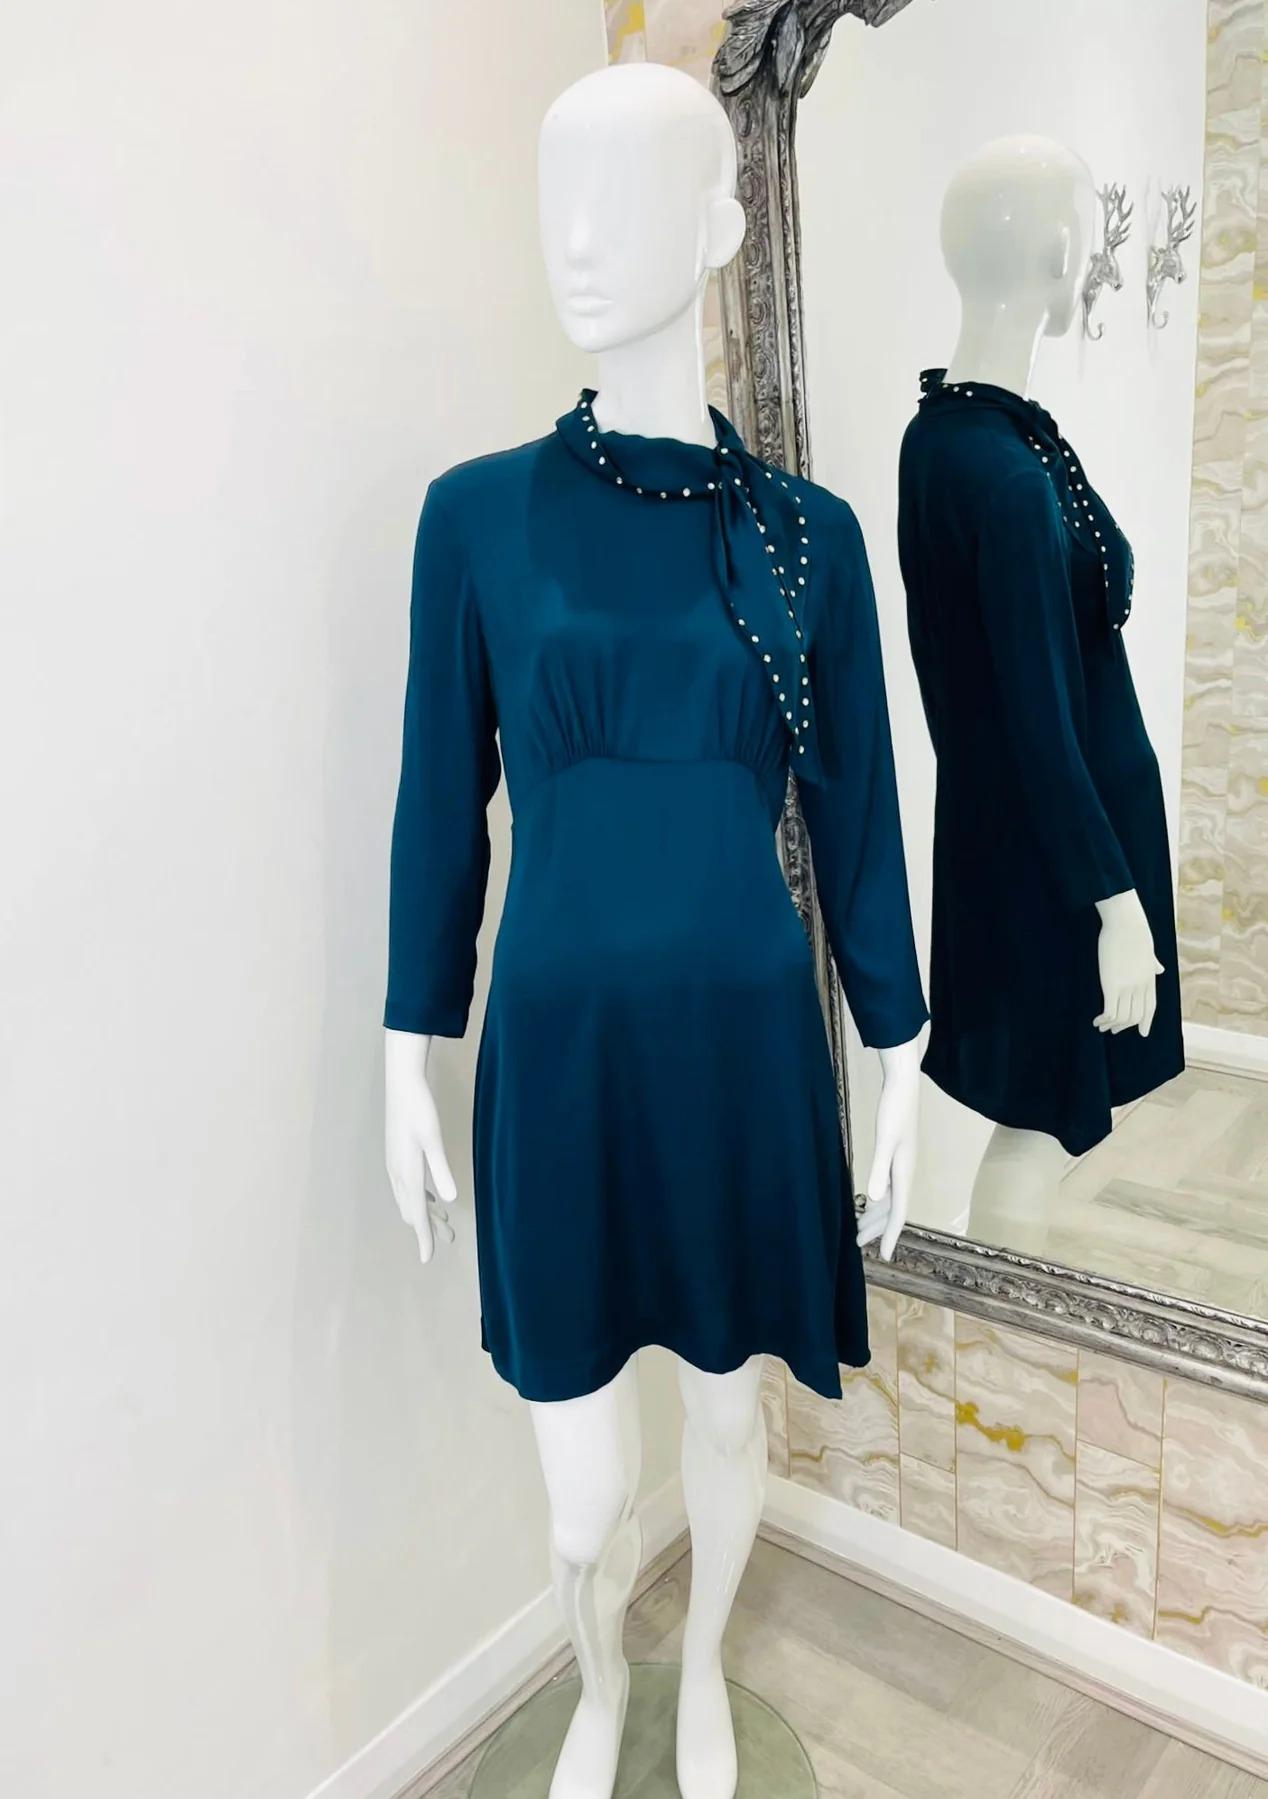 Sandro Satin & Crystal Dress

Dark bottle green with high neck that self ties and is adorned with crystals.

Additional information:
Size – 40FR
Composition- Viscose
Condition – Very Good
